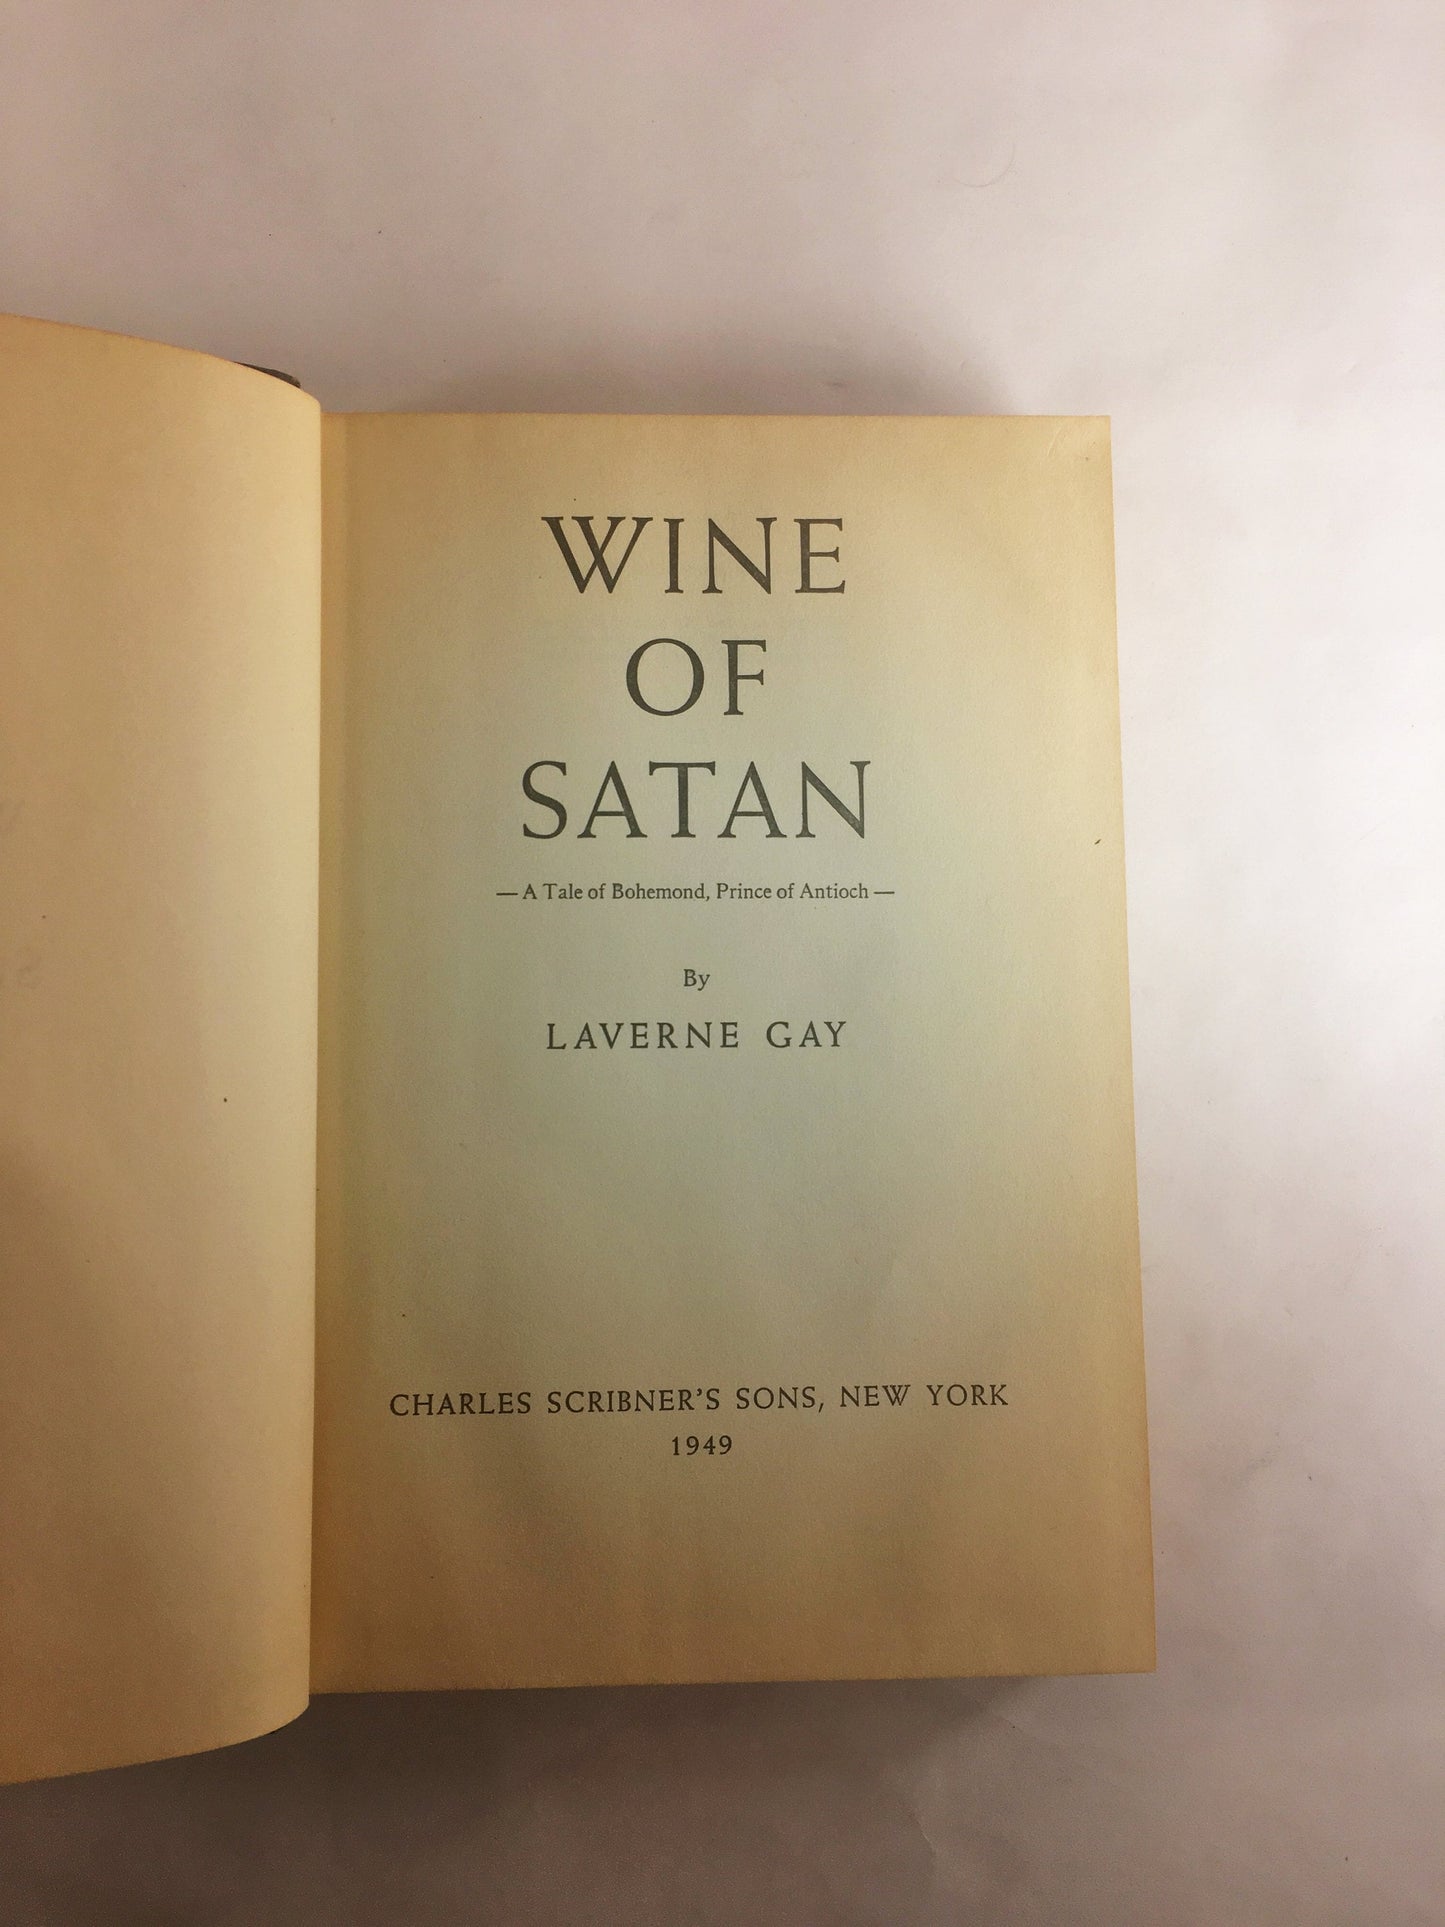 Wine of Satan Bohemond, Prince of Antioch Vintage book by Laverne Gay 1949 Cheating love affairs marriages divorce battles and crusades.